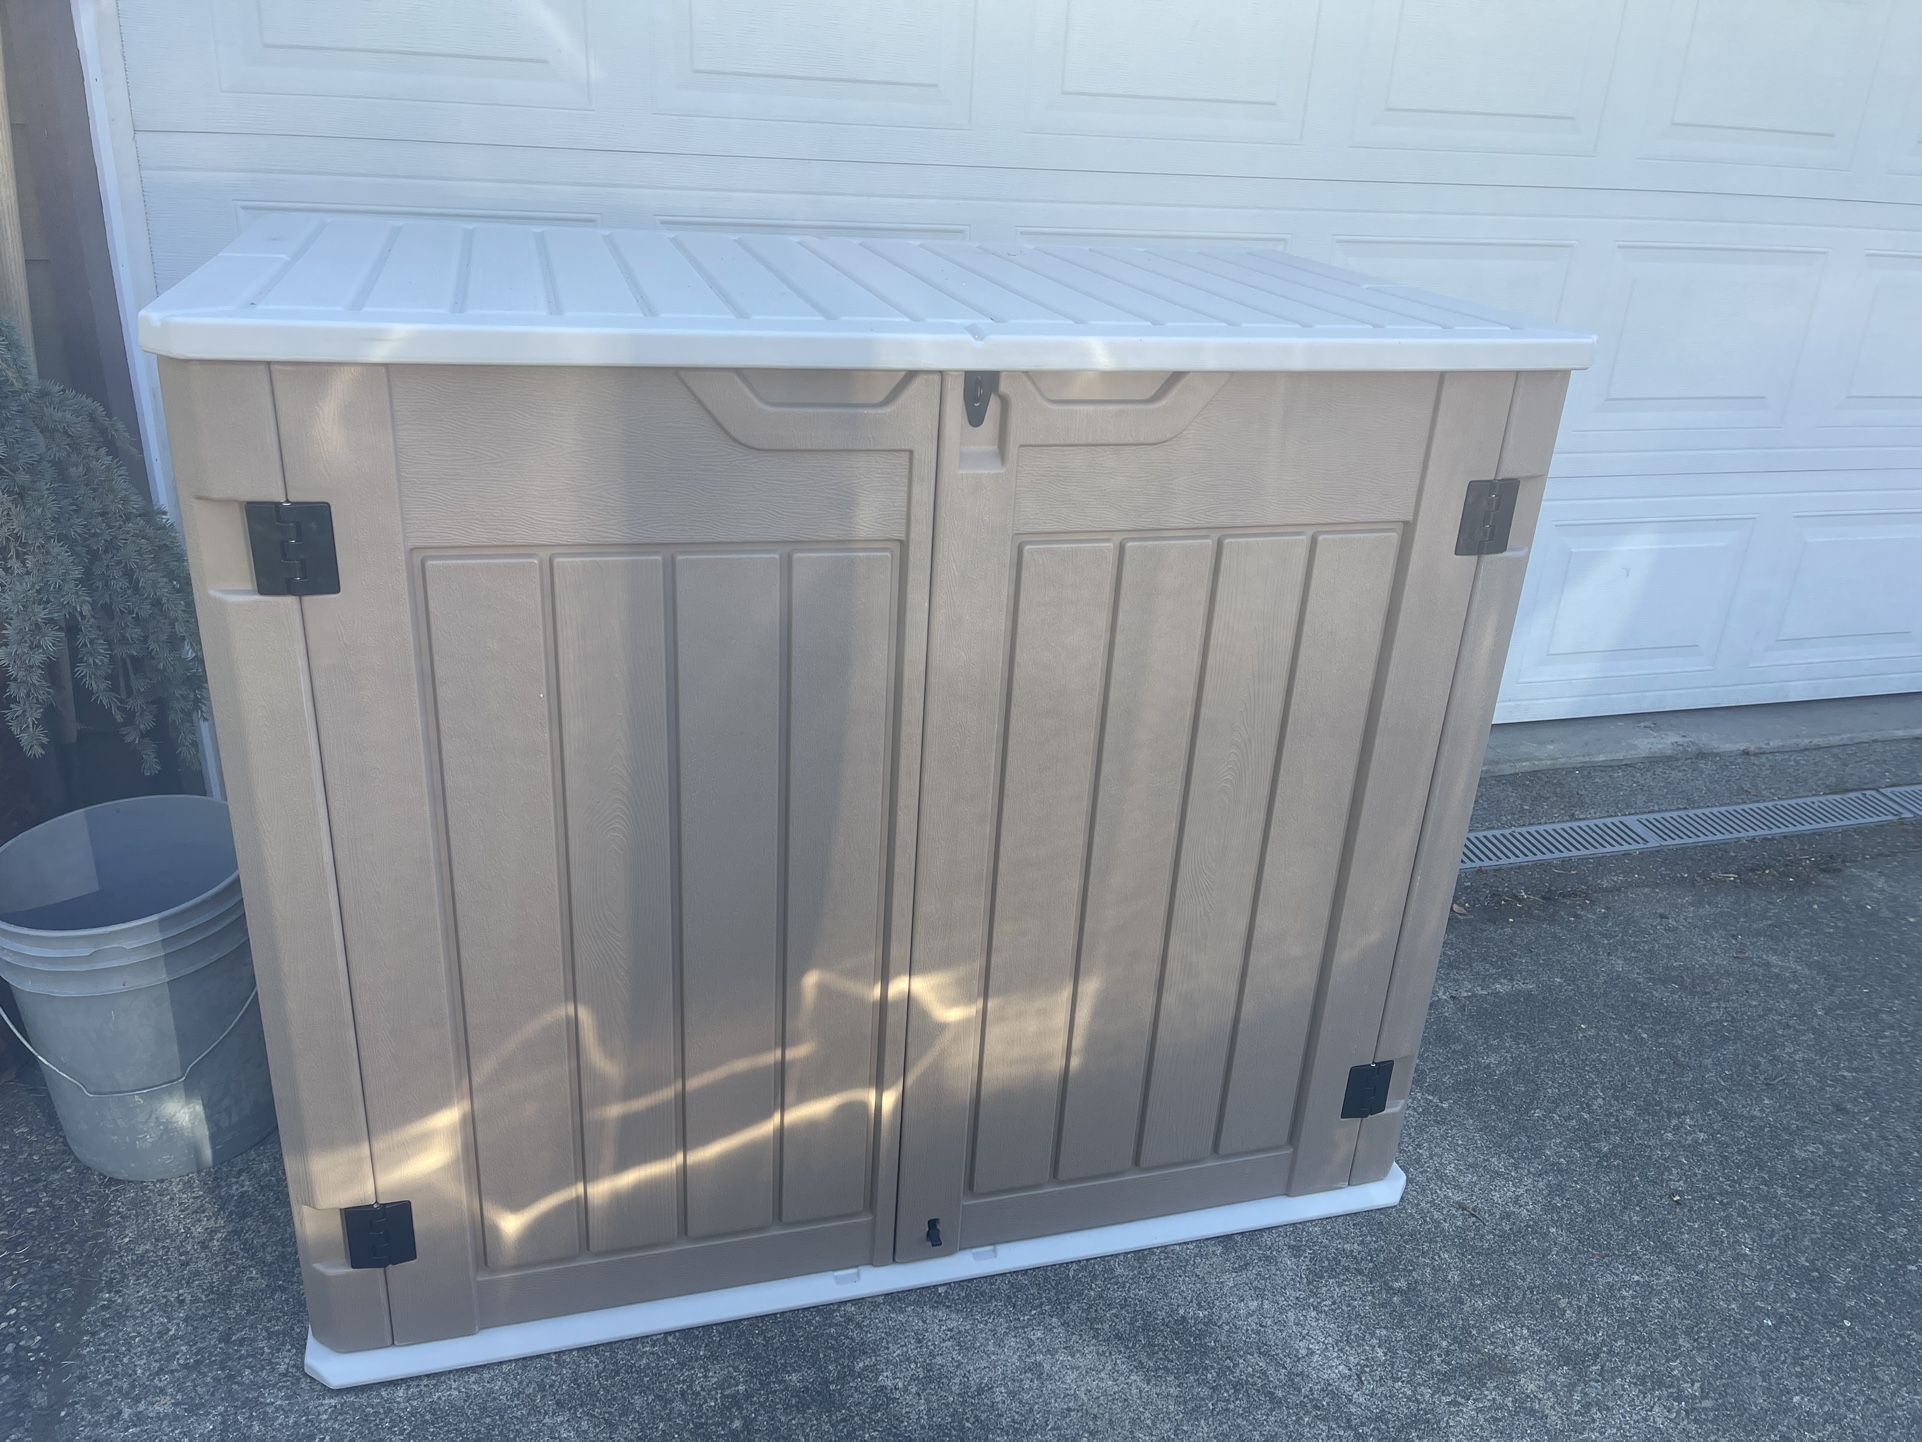 OUTDOOR STORAGE SHED BRAND NEW JUST BUILT!!!